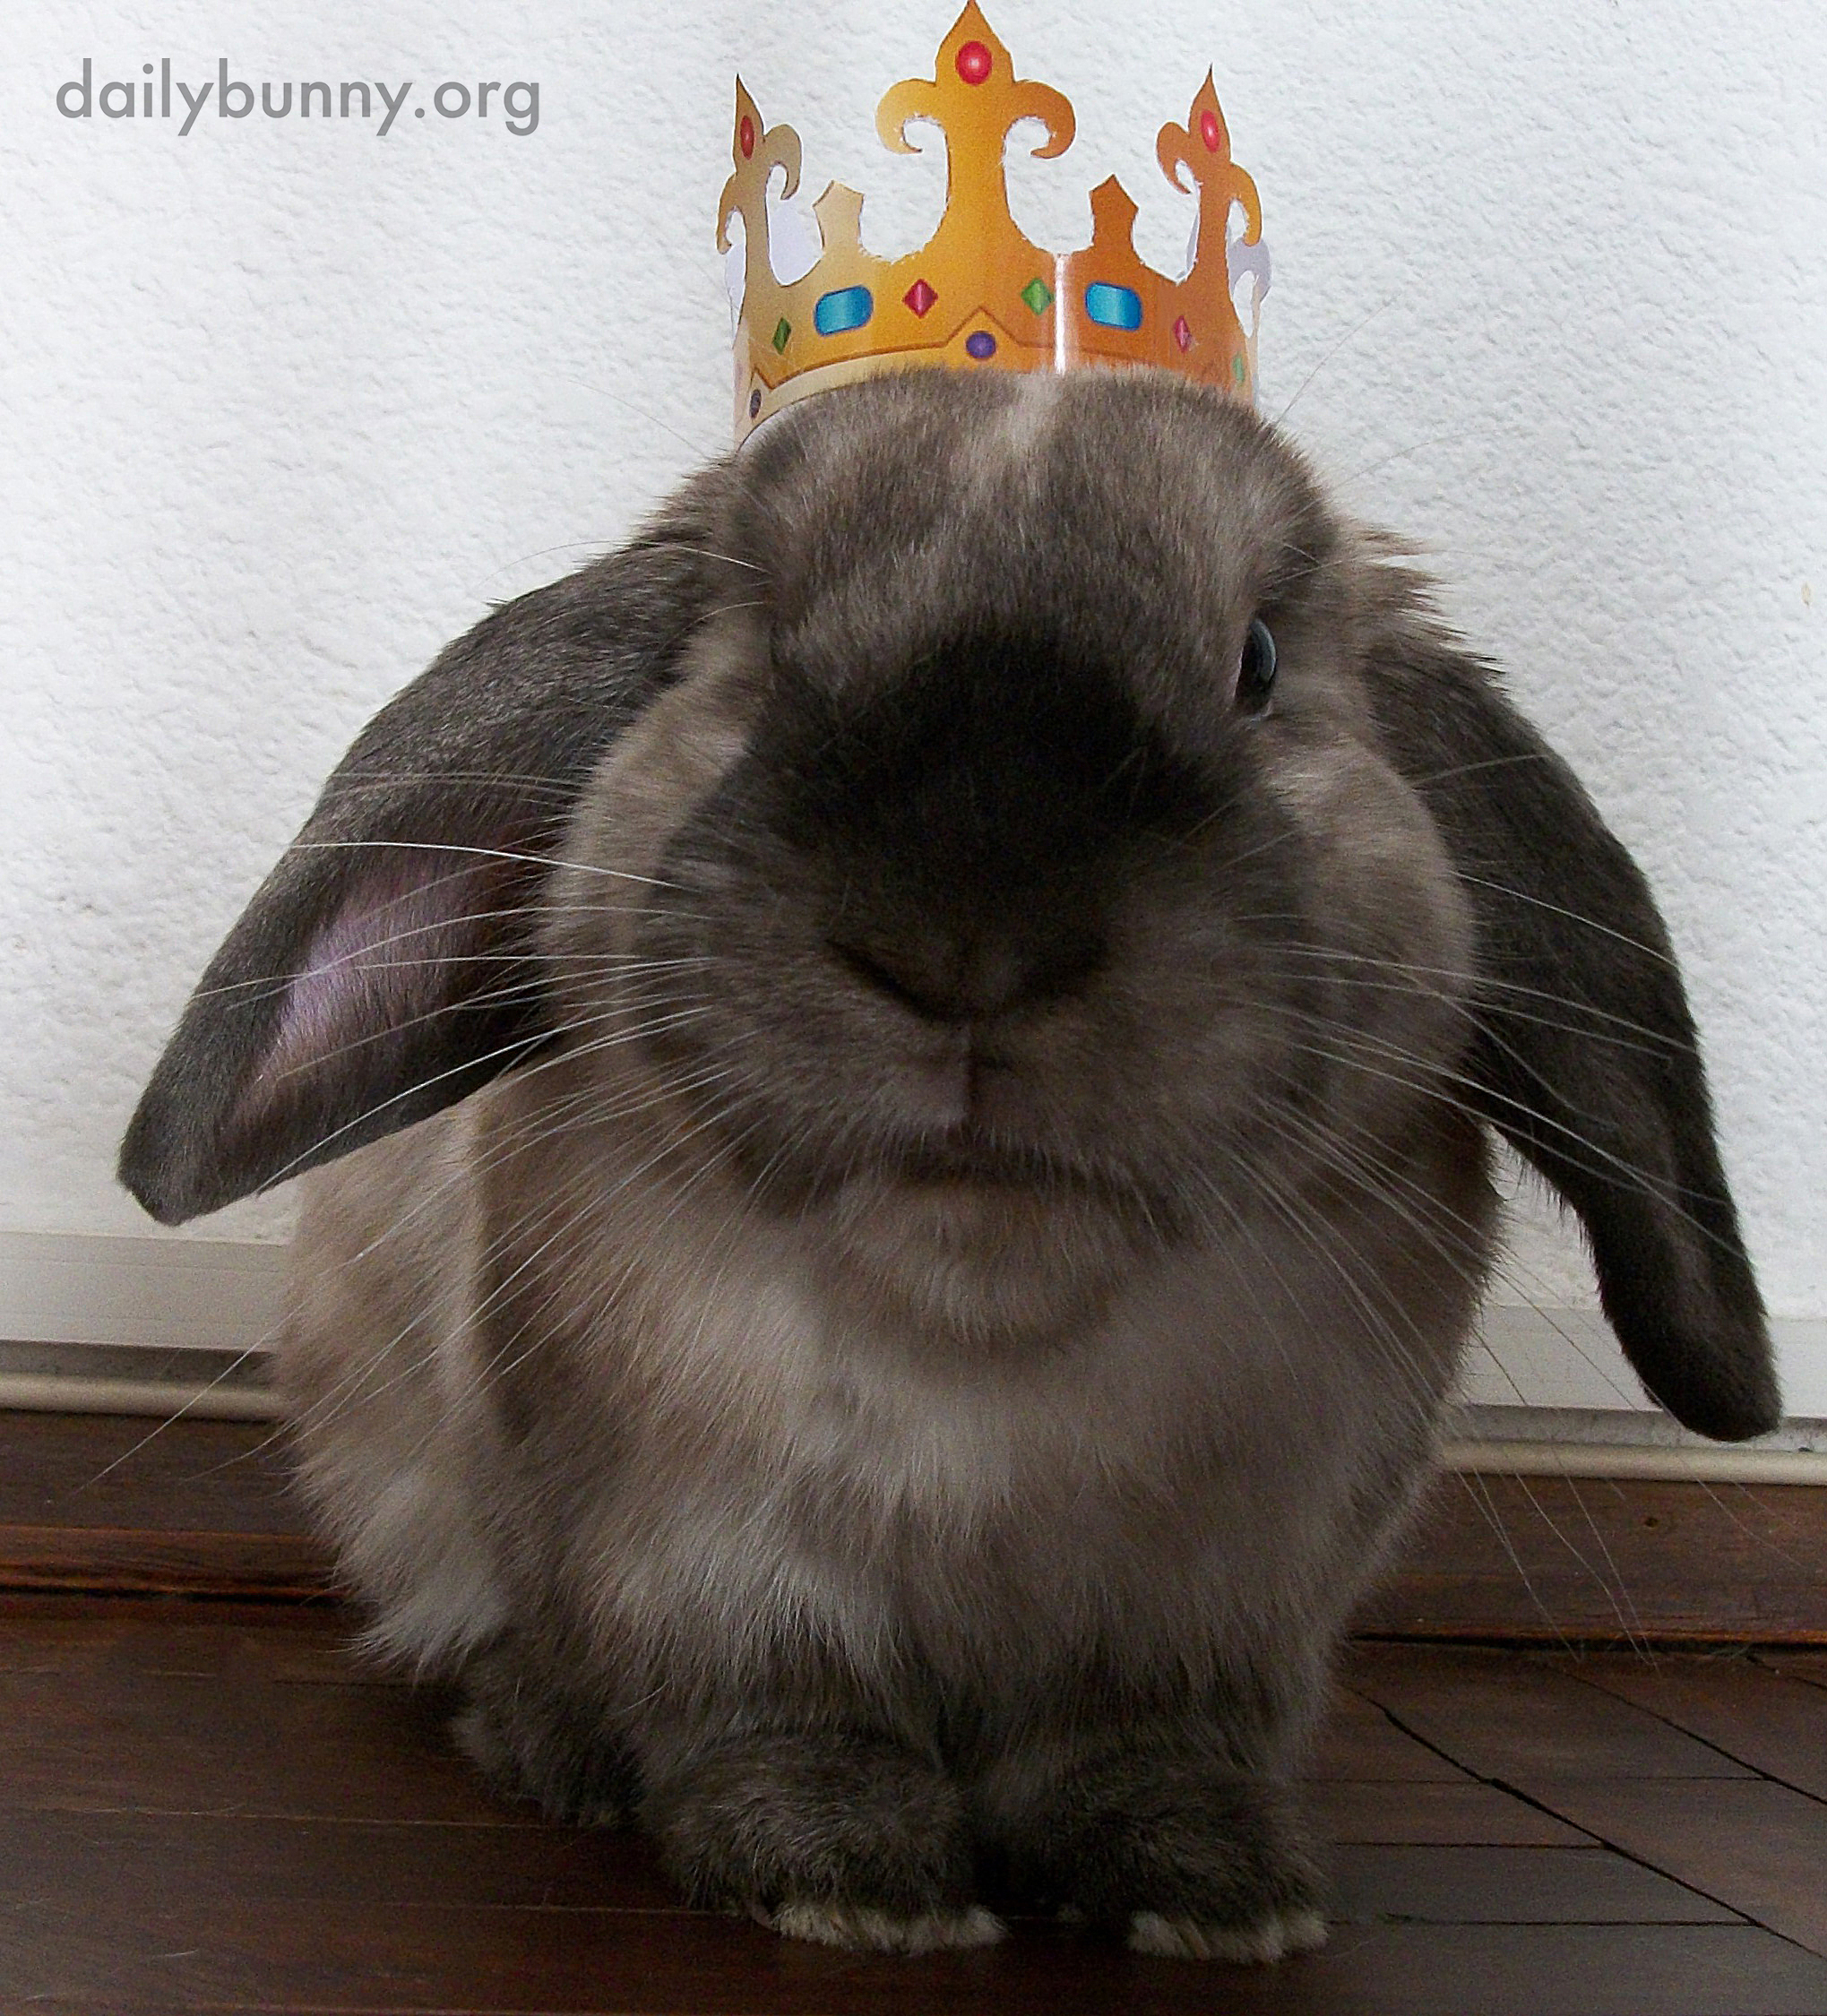 On His Birthday, All Bow to King Bunny